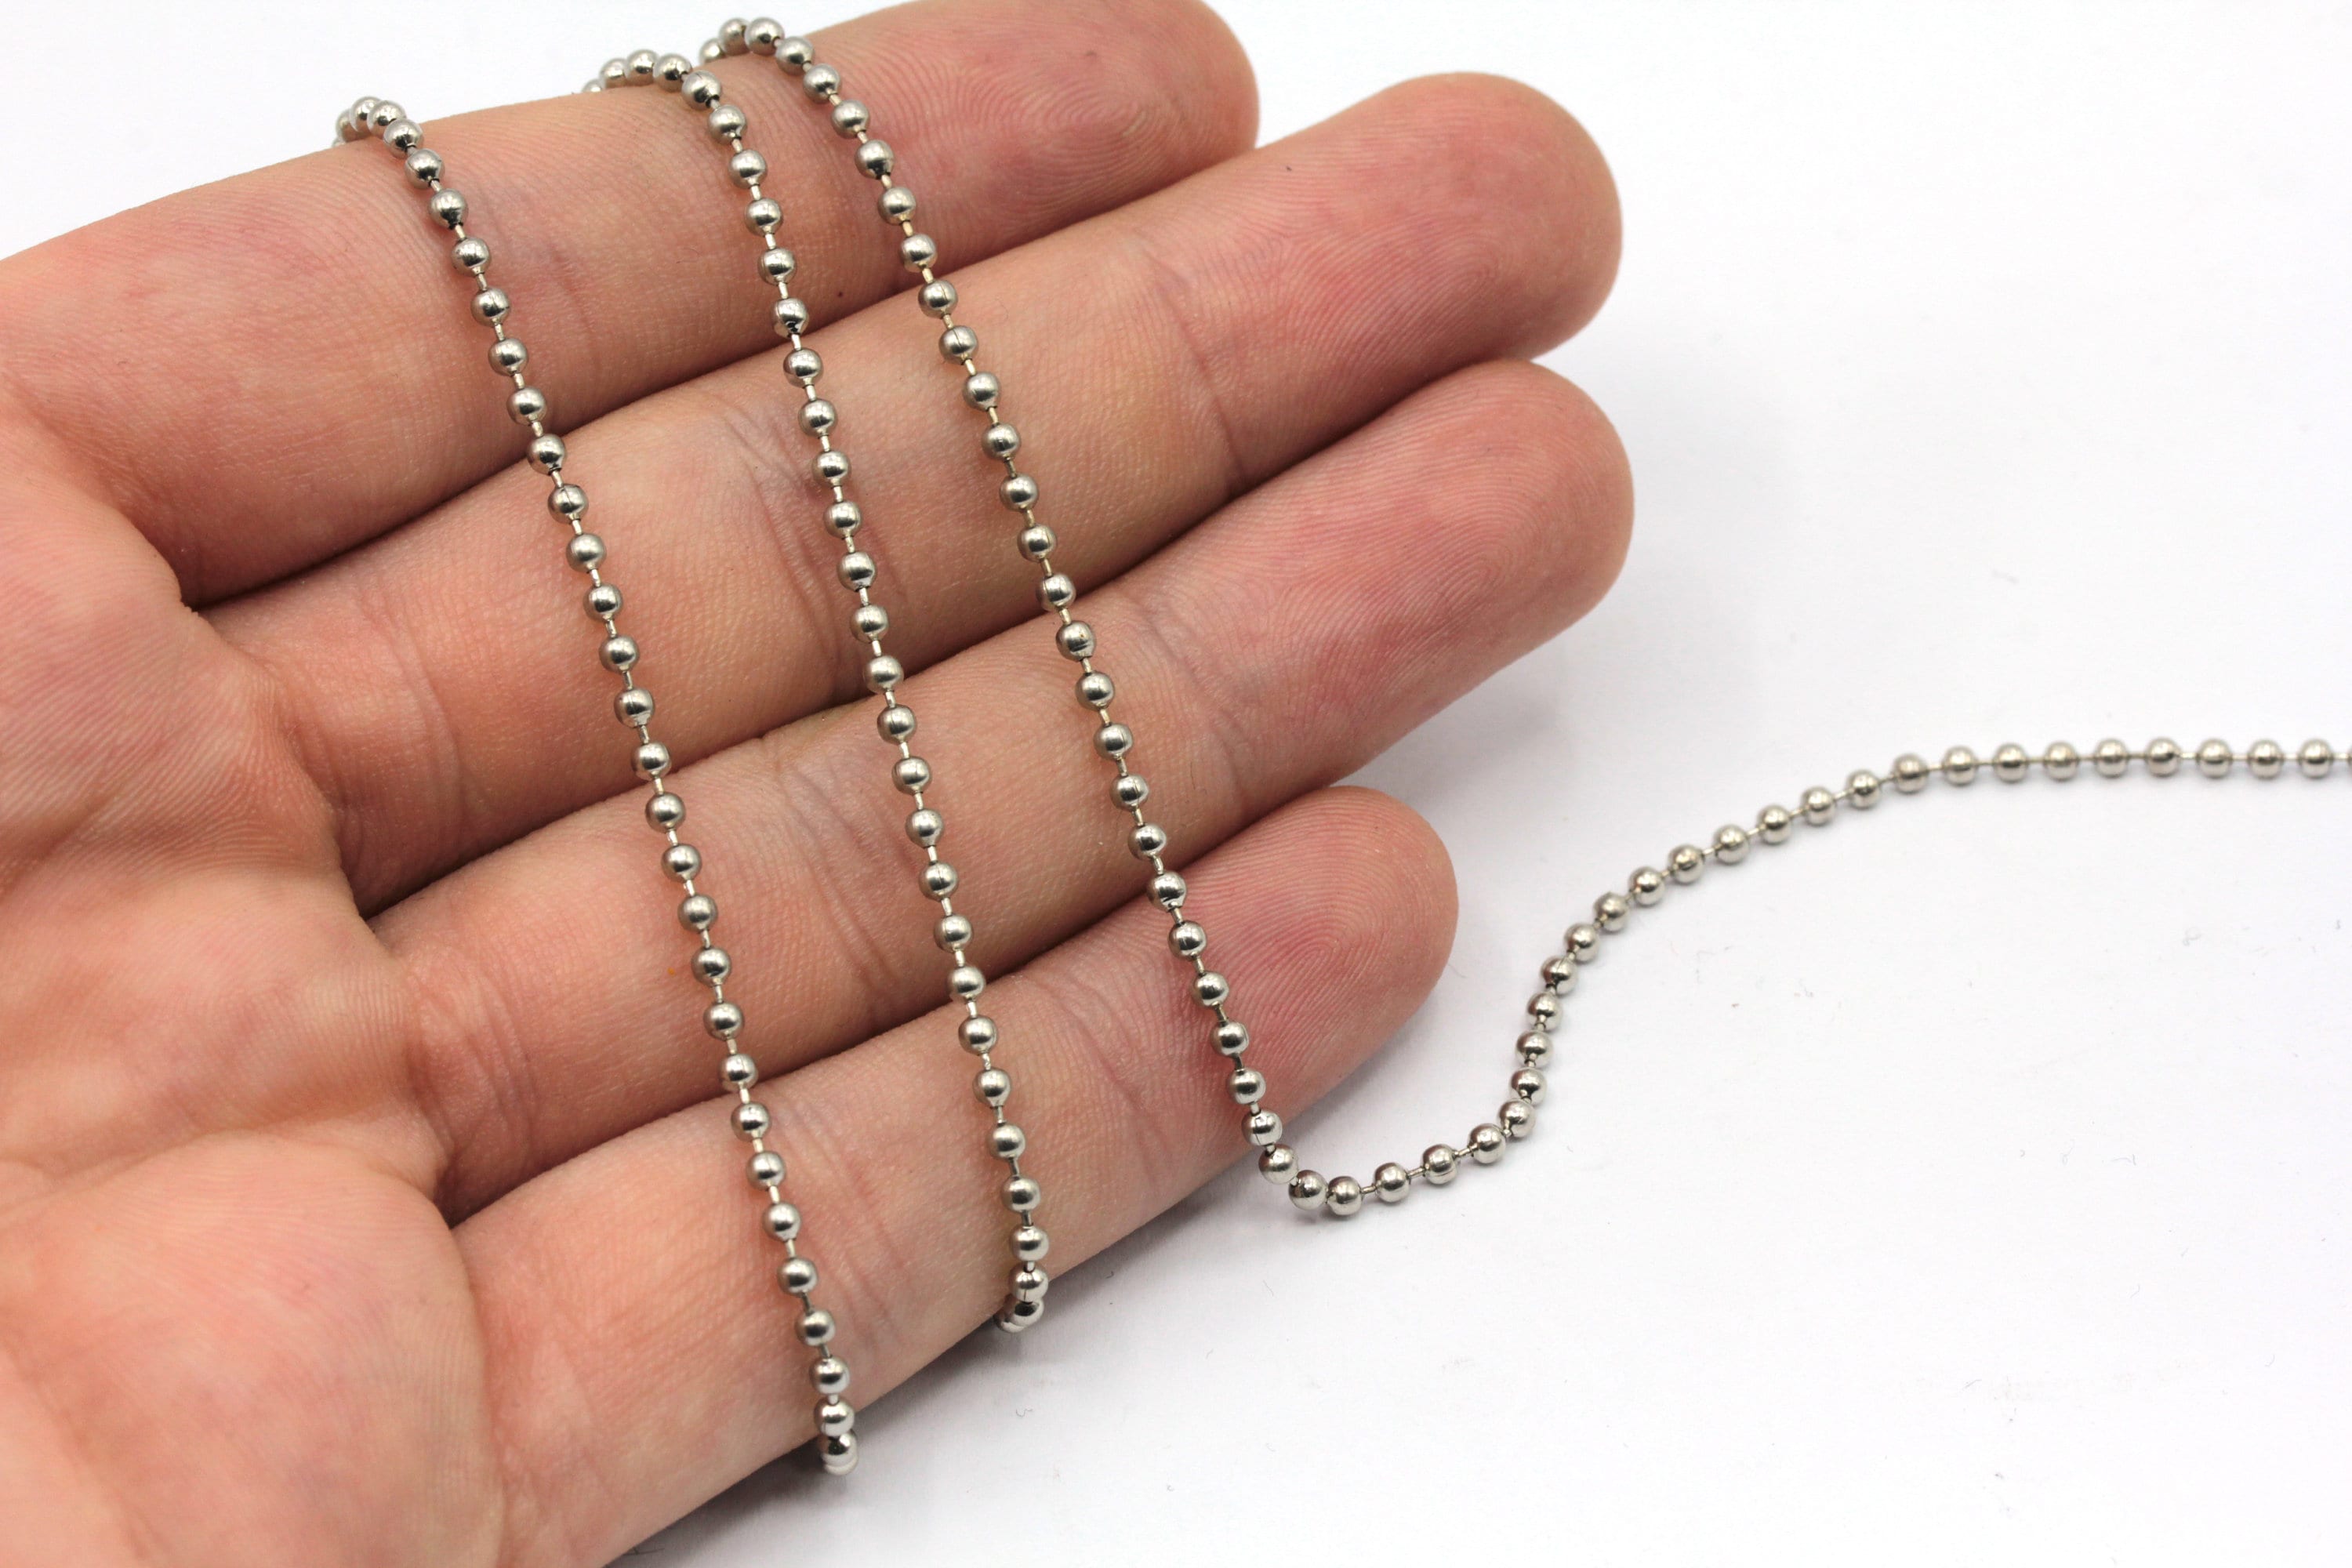 Large 6mm Stainless Steel Ball Chain Necklace, Metal Beads, Men's Women's Unisex, Metal Pearls